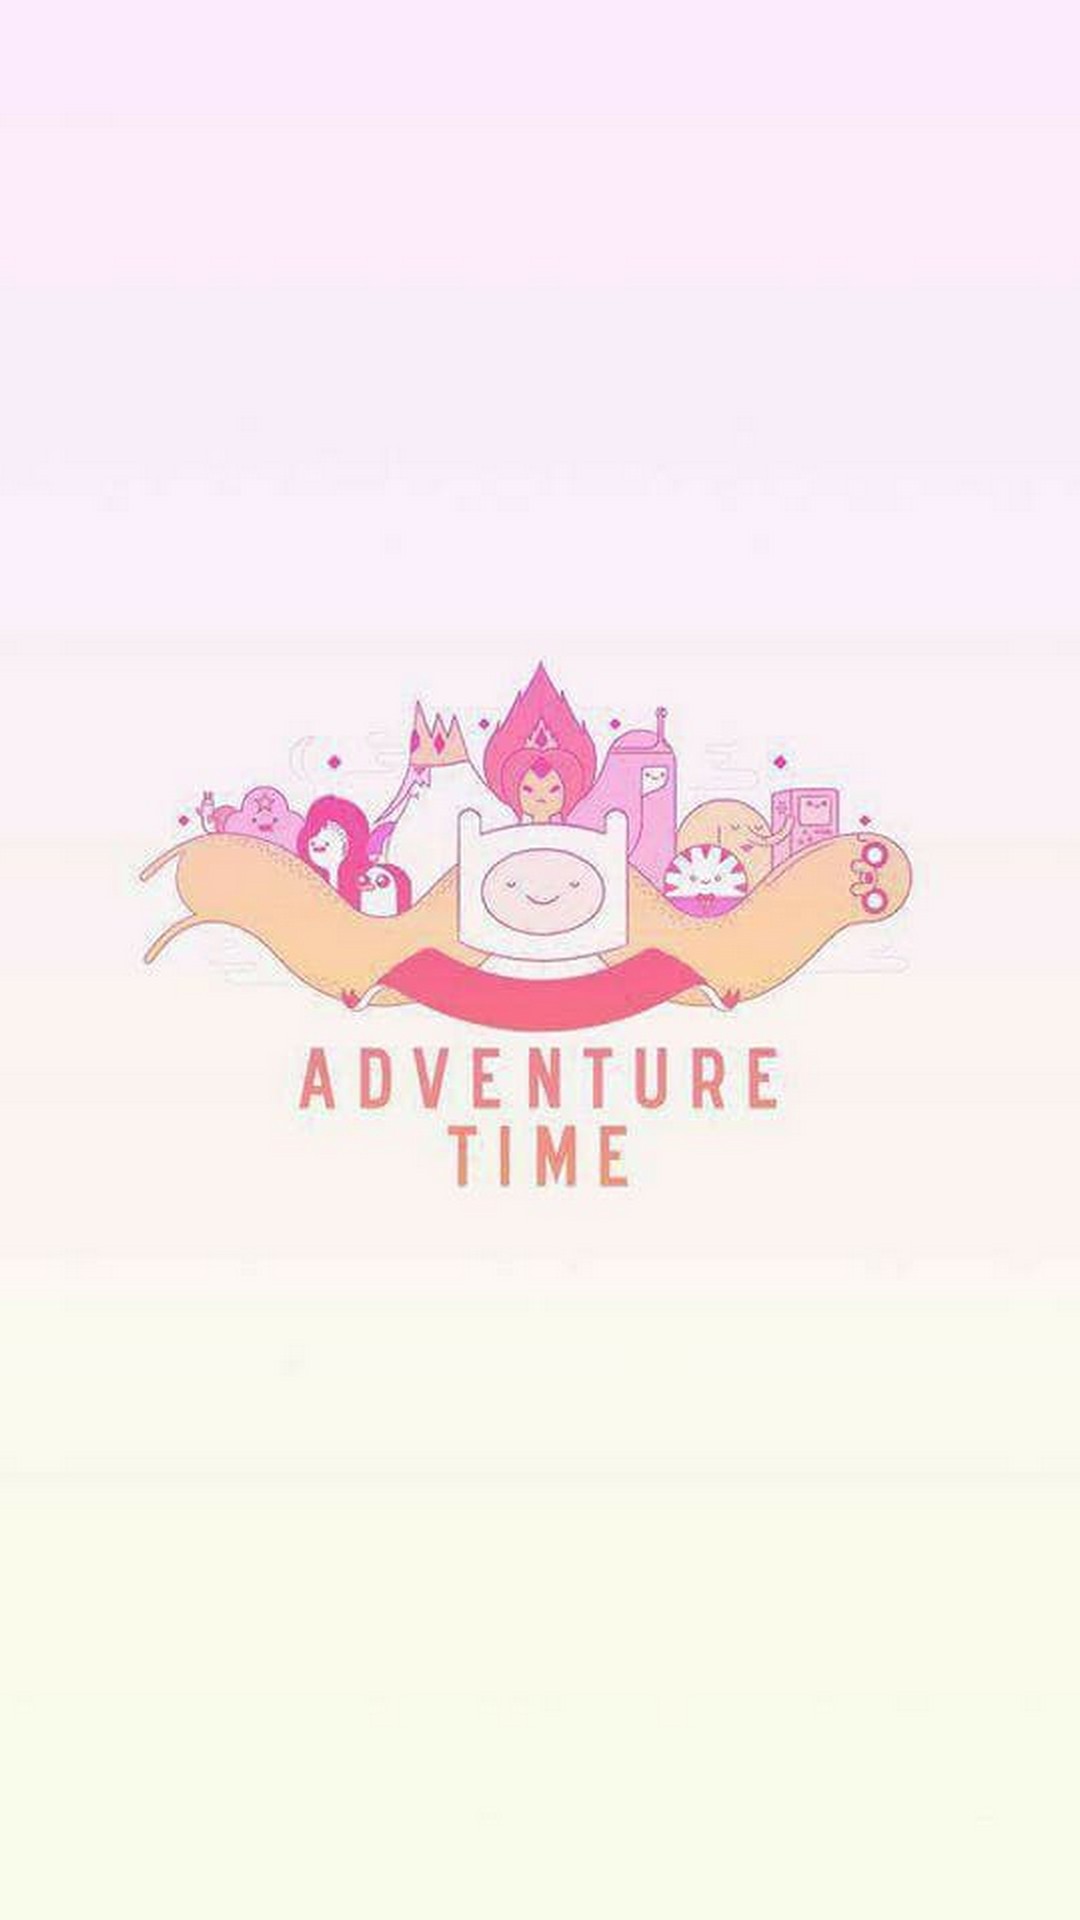 Adventure Time Cartoon Network Wallpaper iPhone HD with image resolution 1080x1920 pixel. You can use this wallpaper as background for your desktop Computer Screensavers, Android or iPhone smartphones